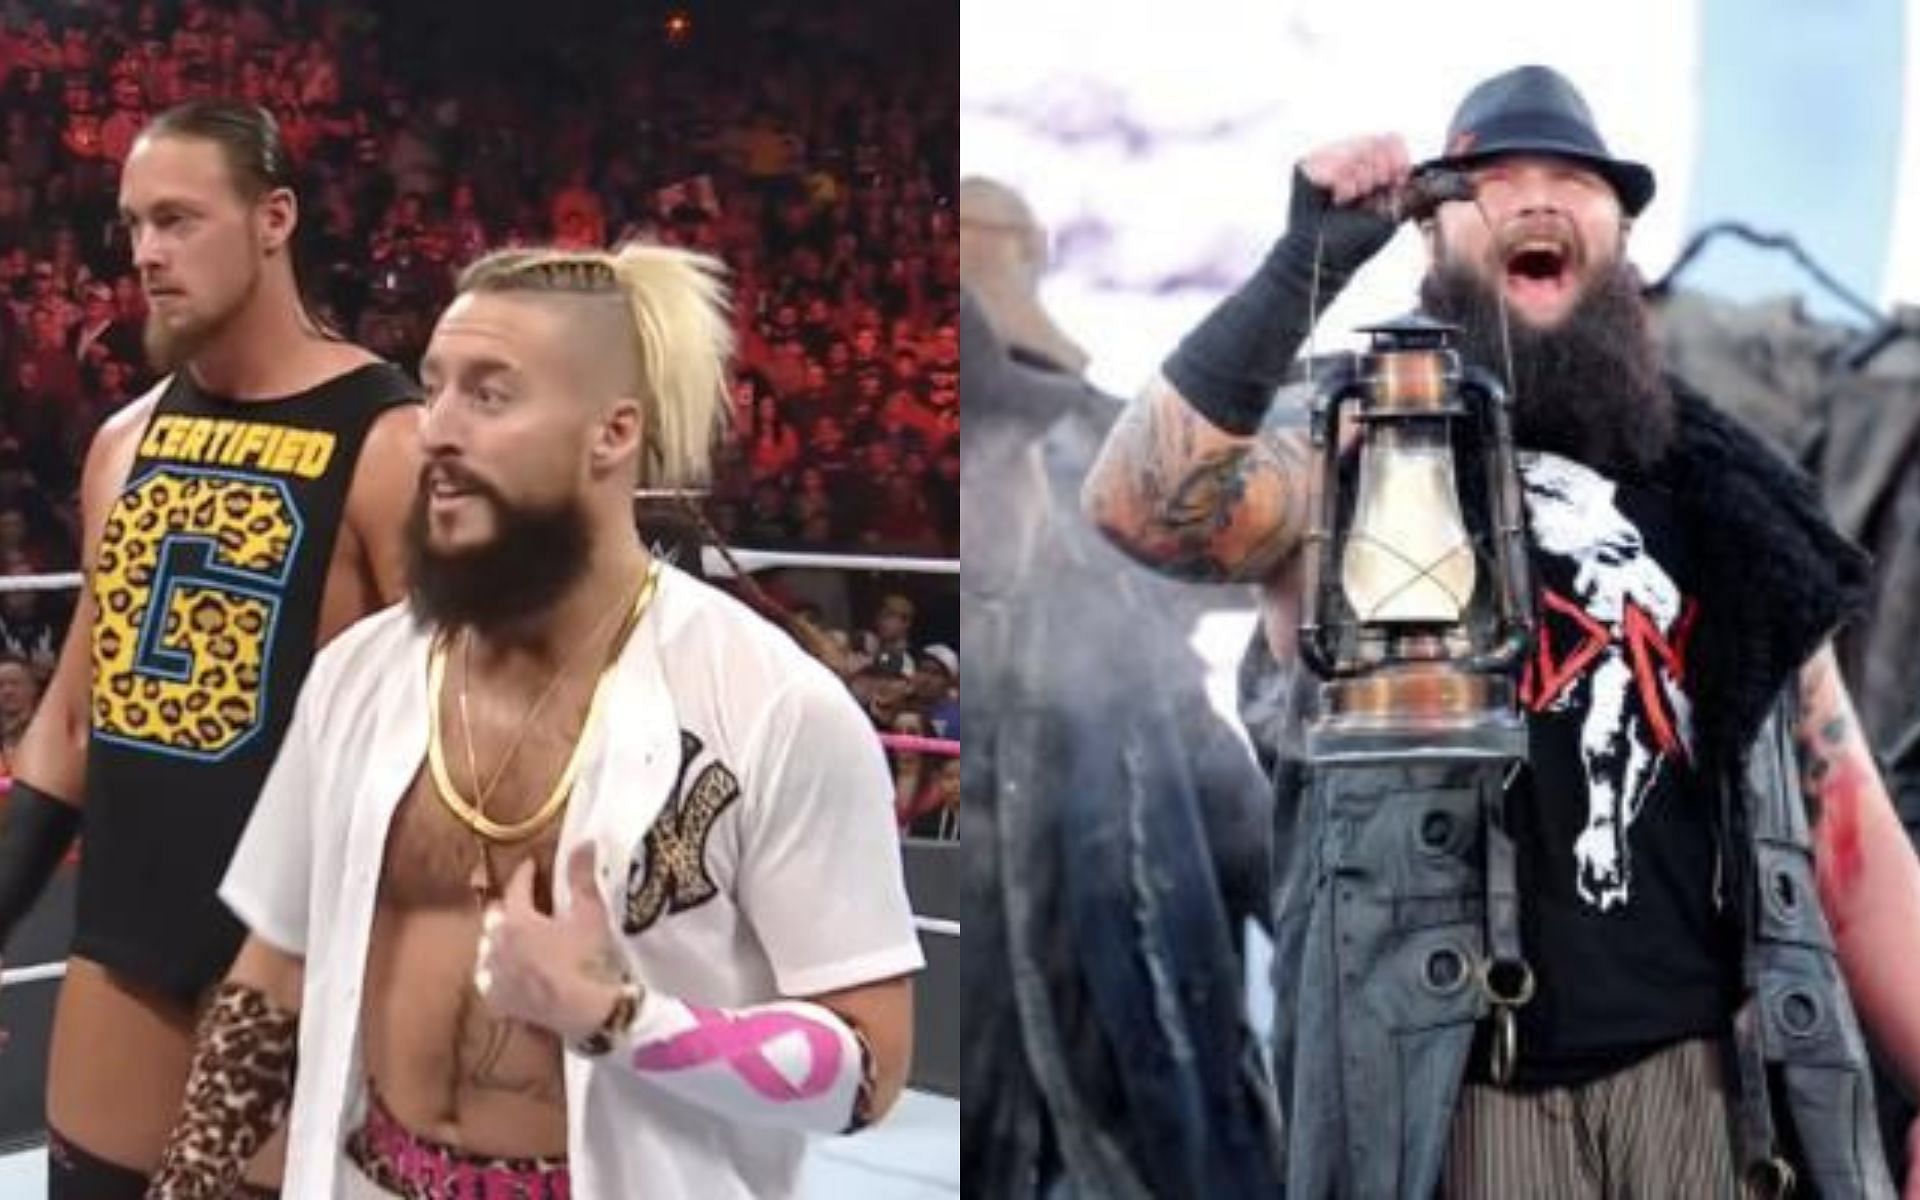 Triple H and Steph could score HUGE points with the WWE Universe by bringing back The Wyatt Family and Enzo &amp; Big Cass!